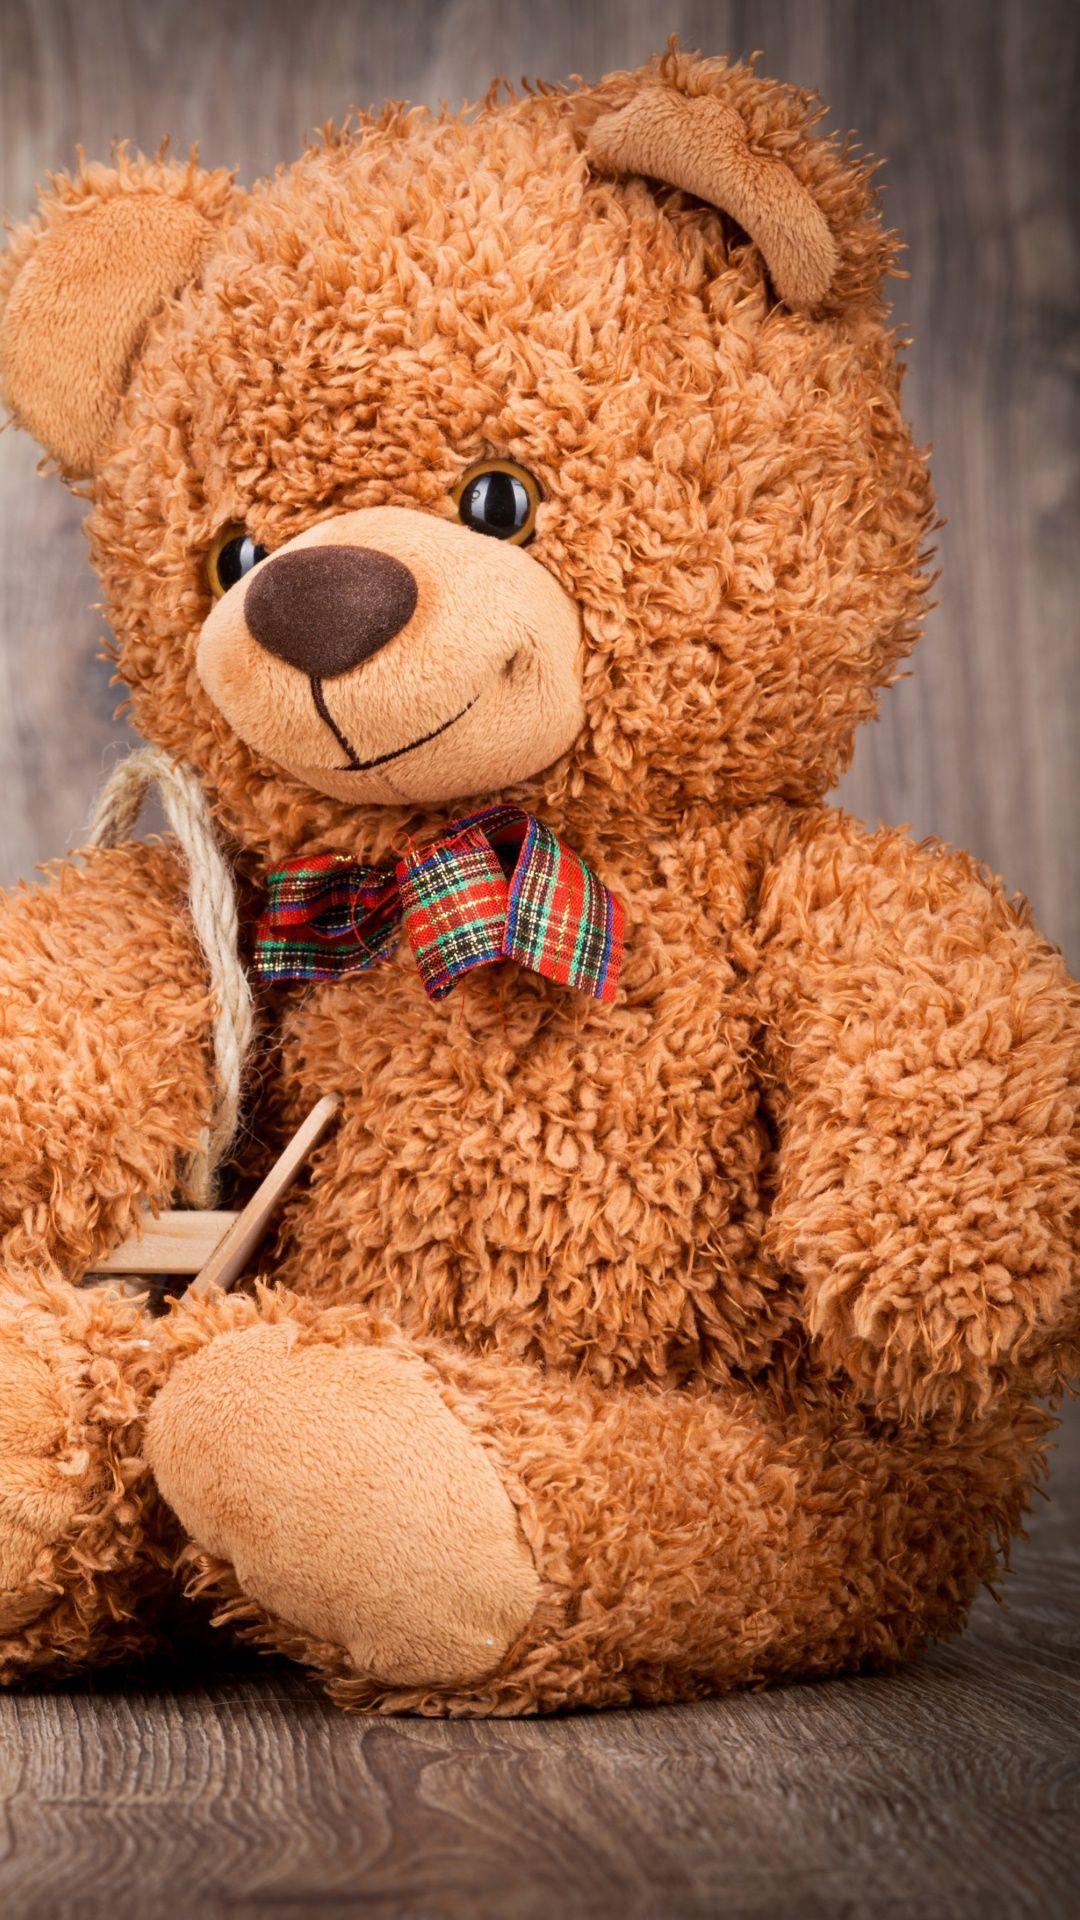 Teddy Bear iPhone Wallpapers - Top Free